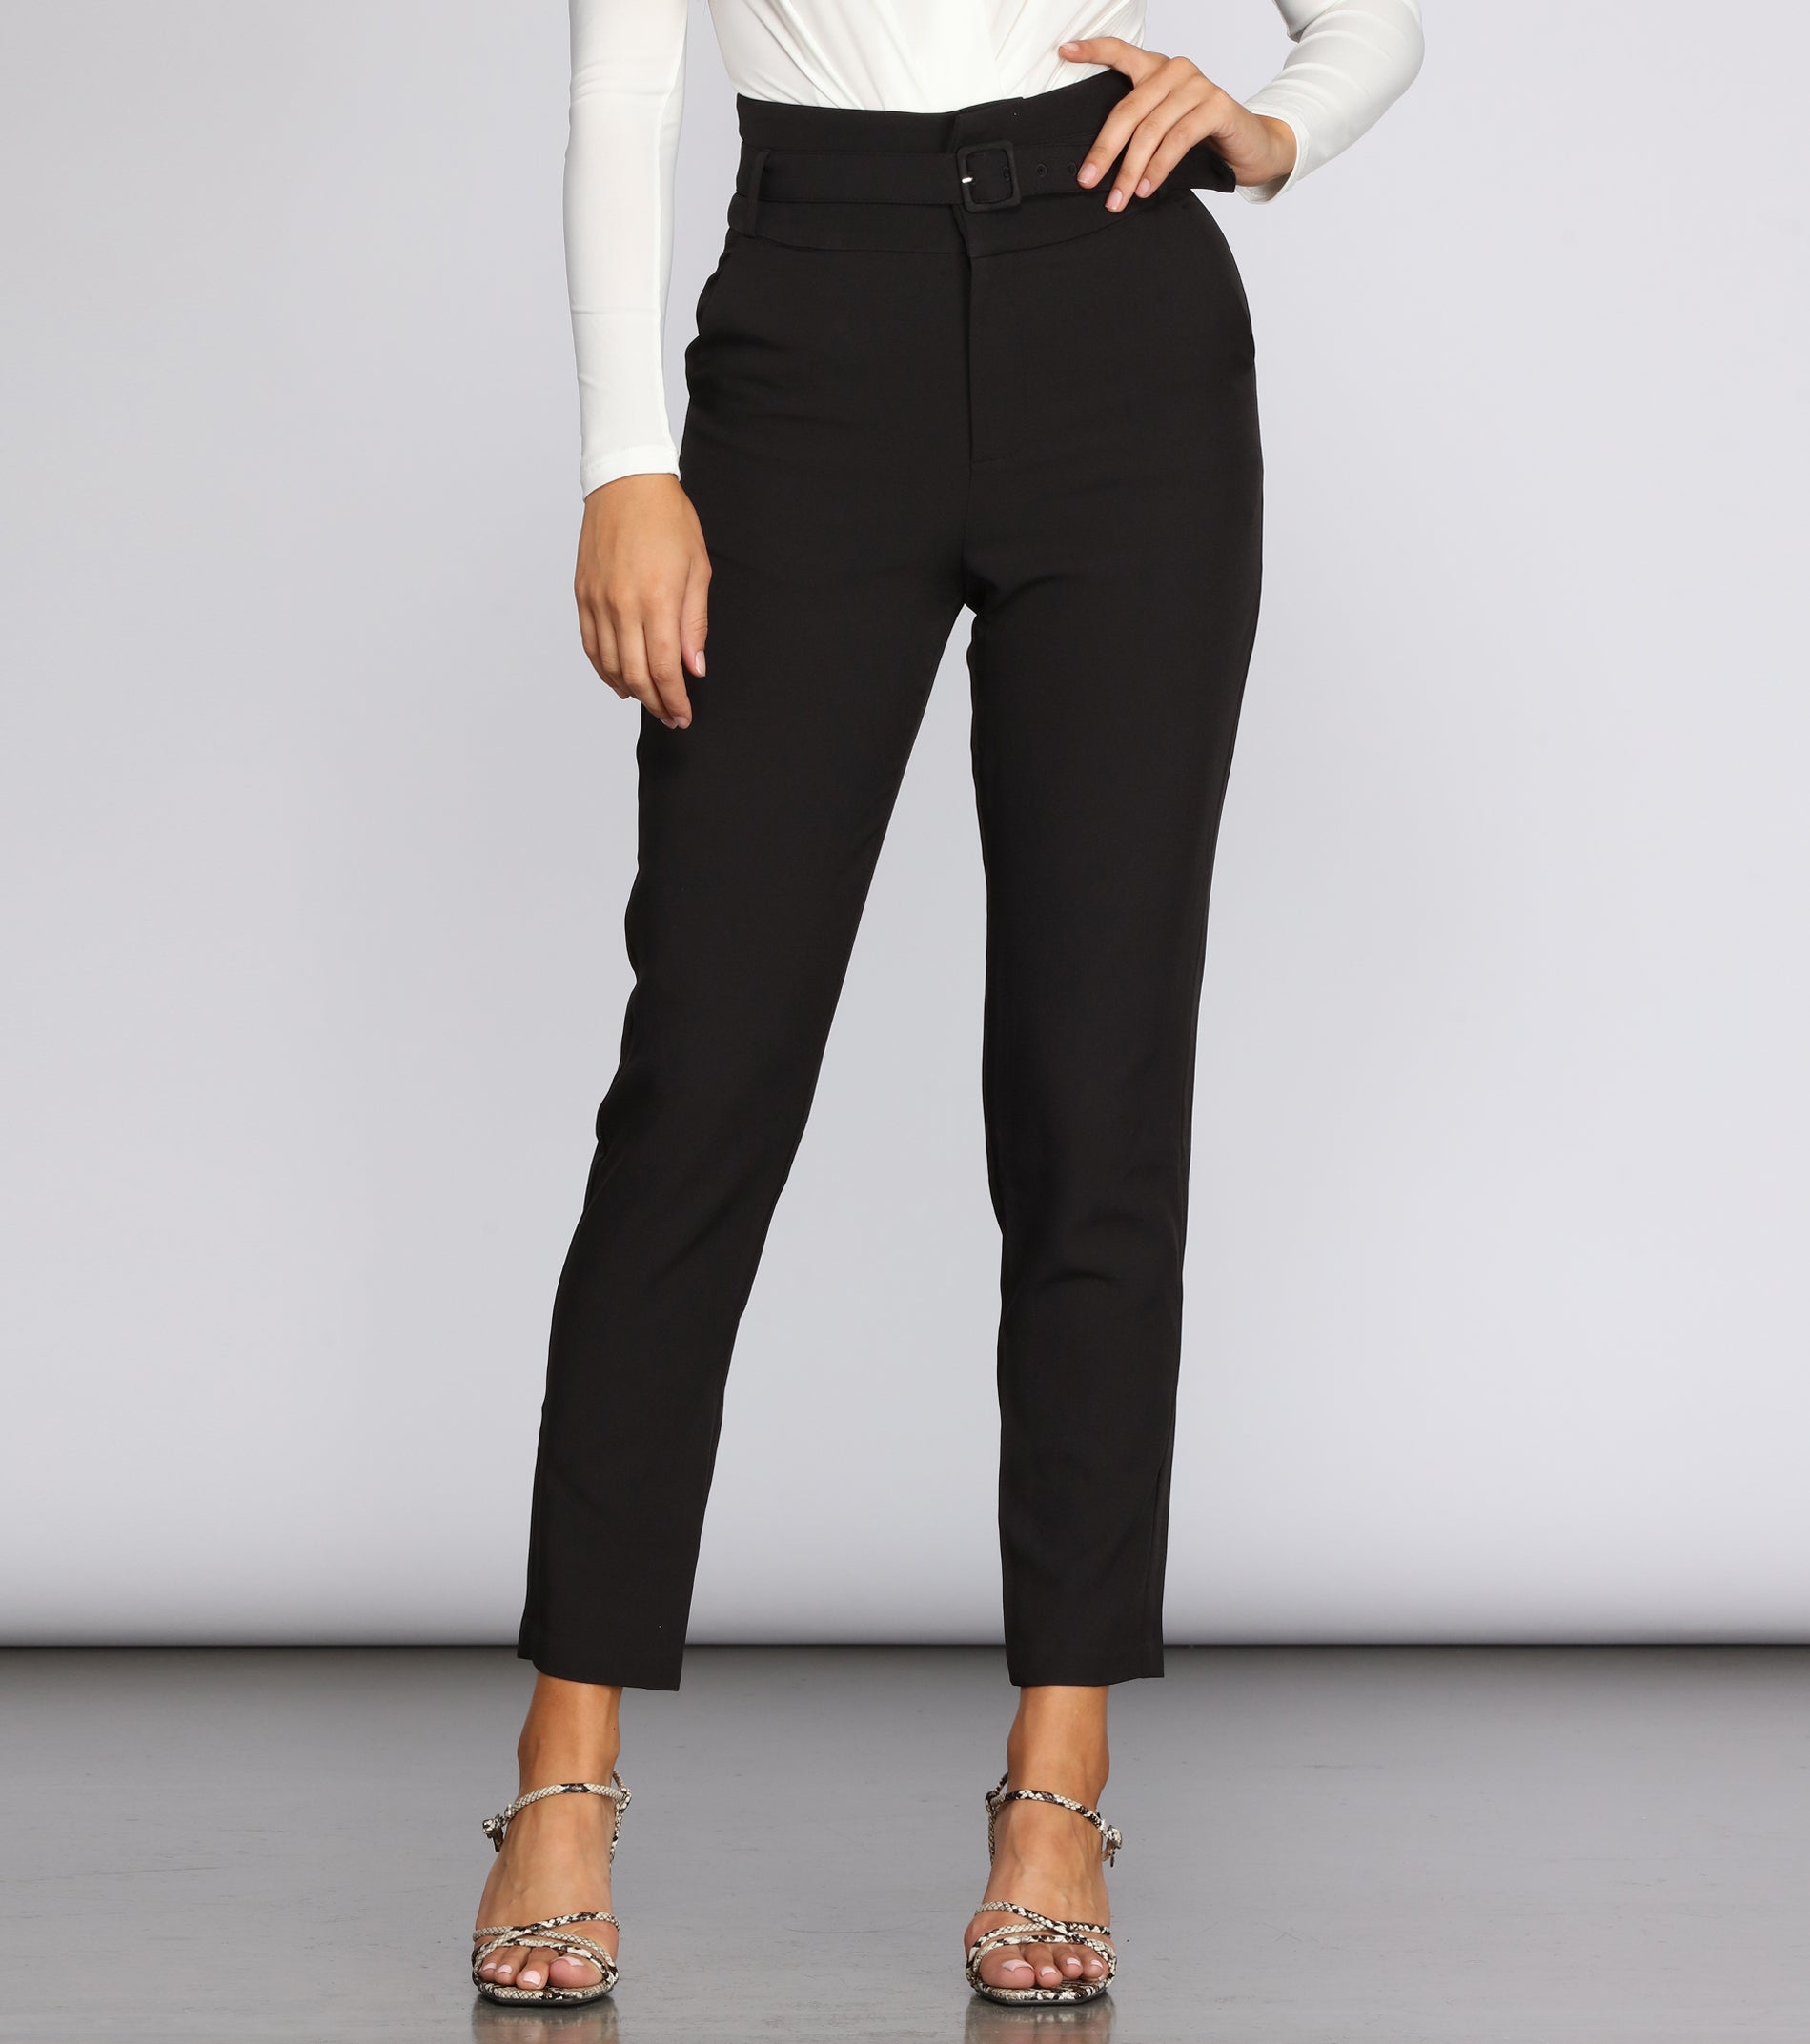 Classic And Chic Belted Pants & Windsor